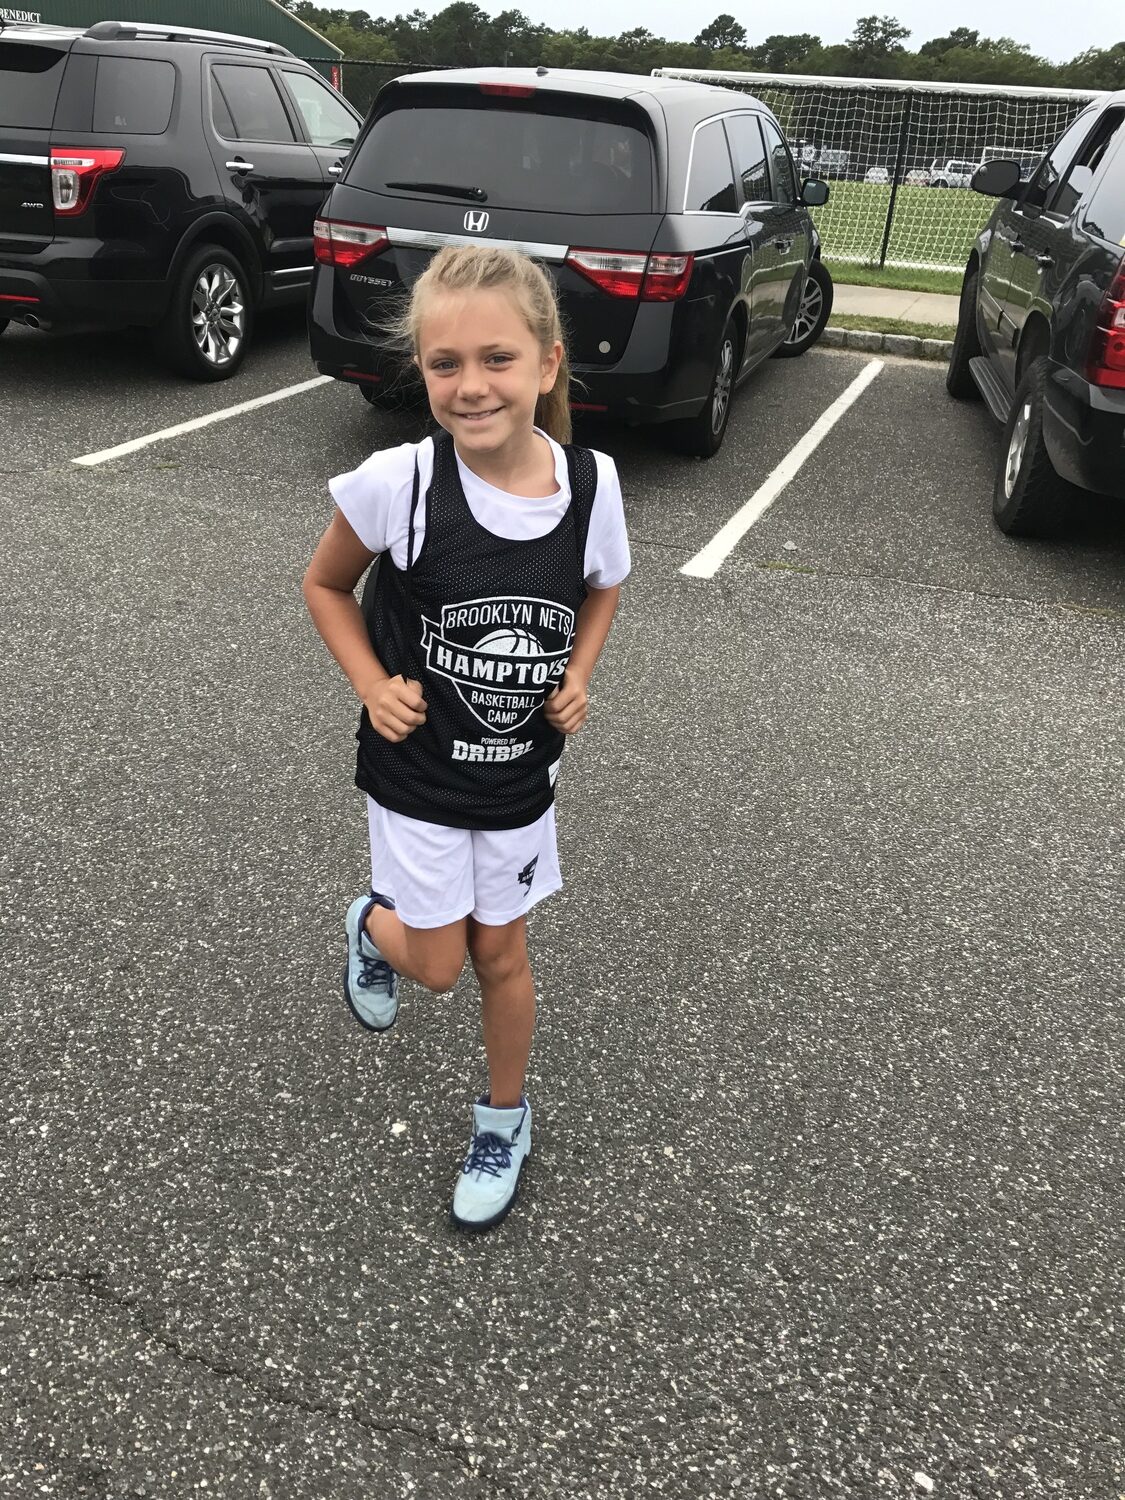 Coco Lohmiller has been dedicated to basketball from a young age.